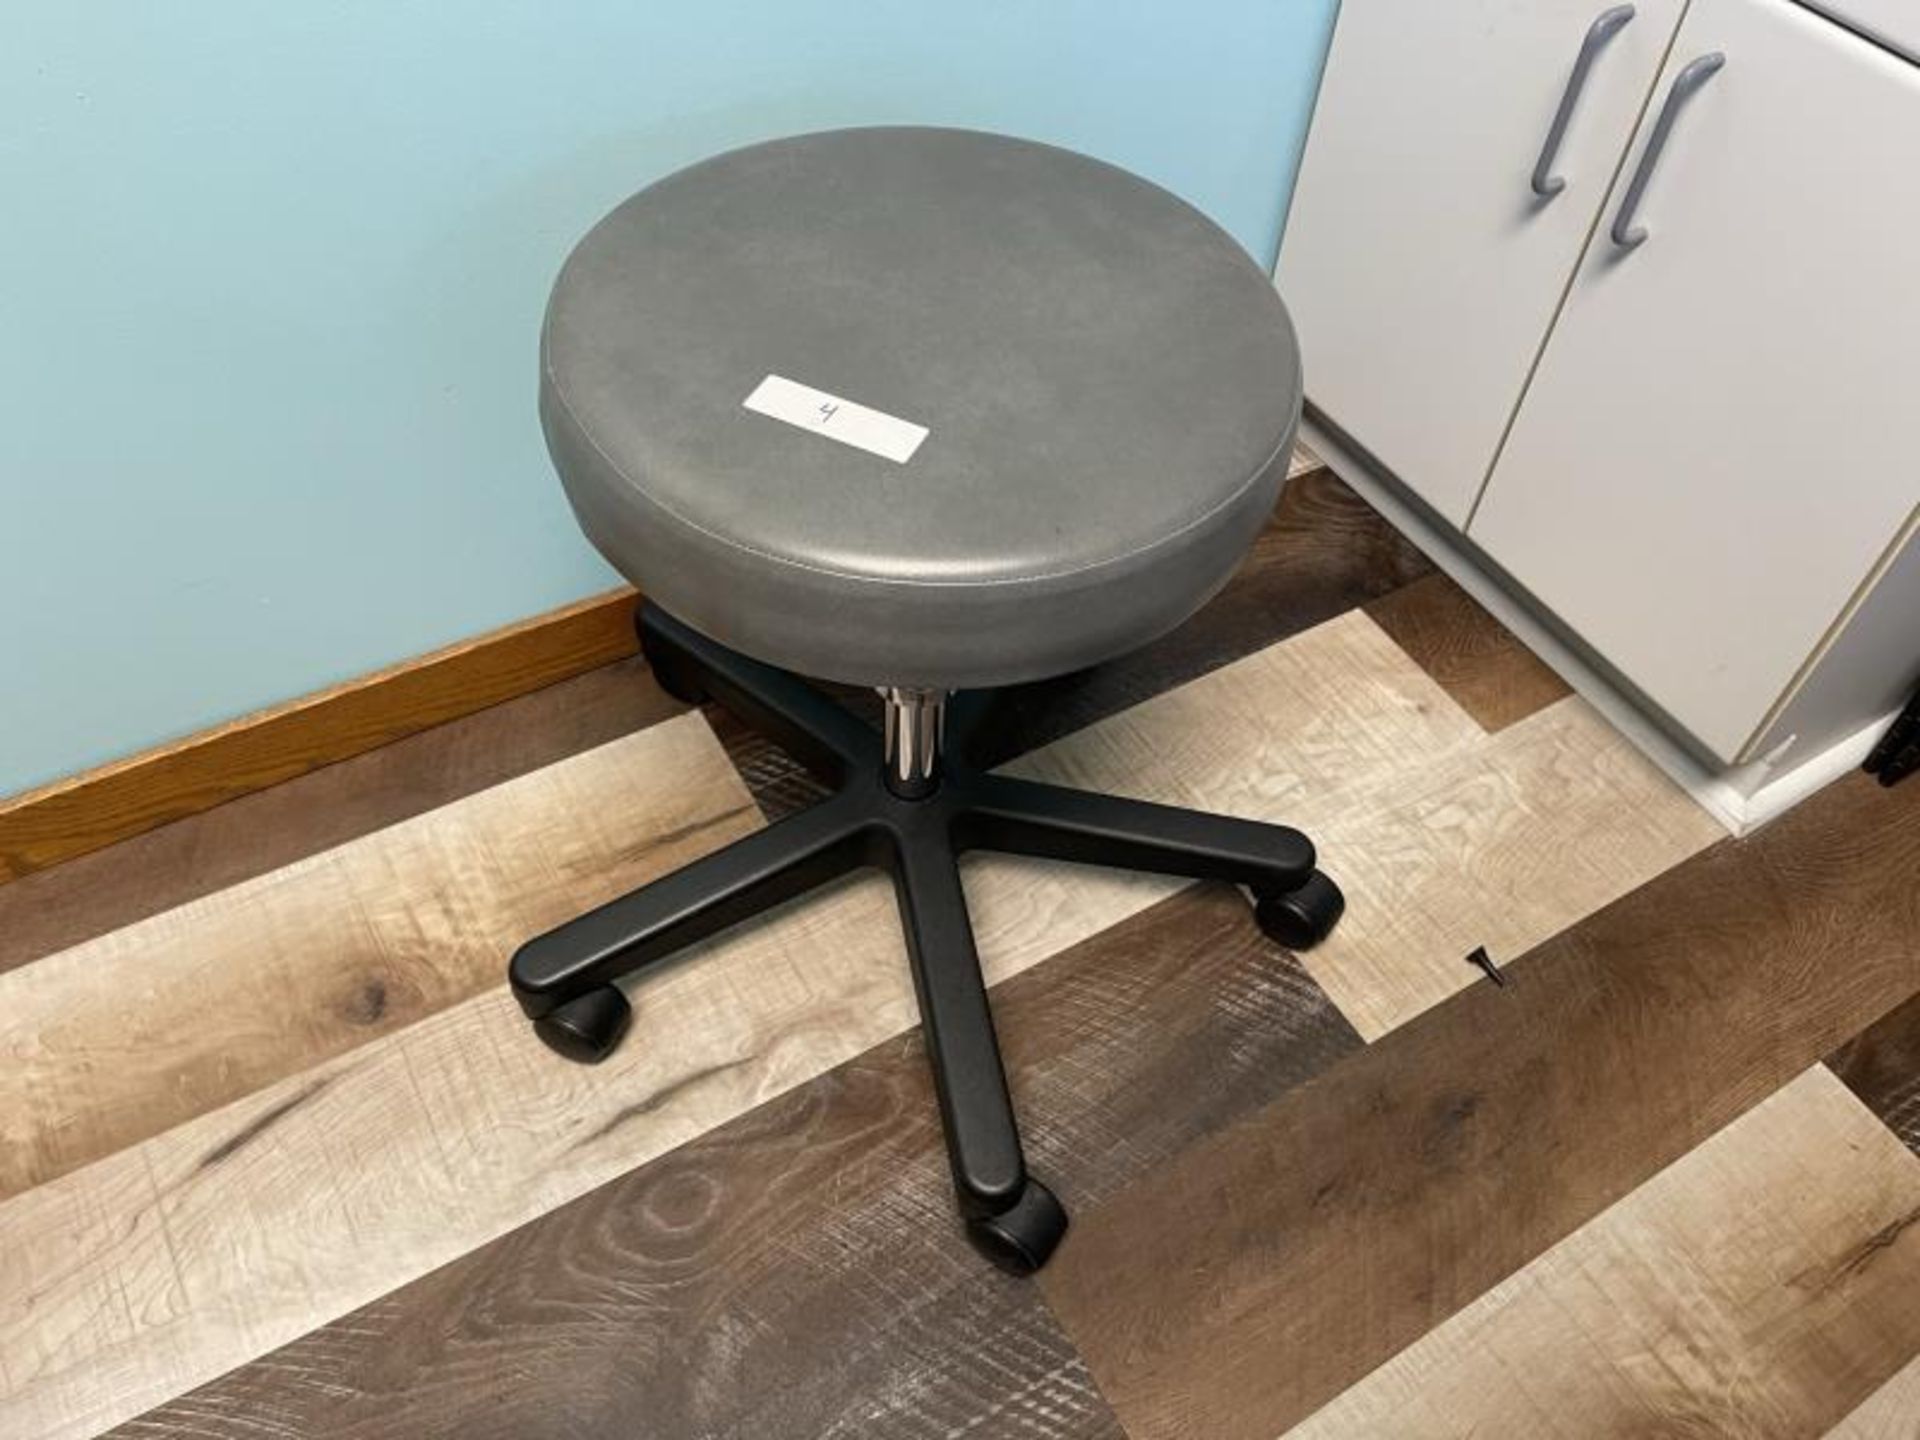 Dr's Stool by Midmark, Model: 193-001